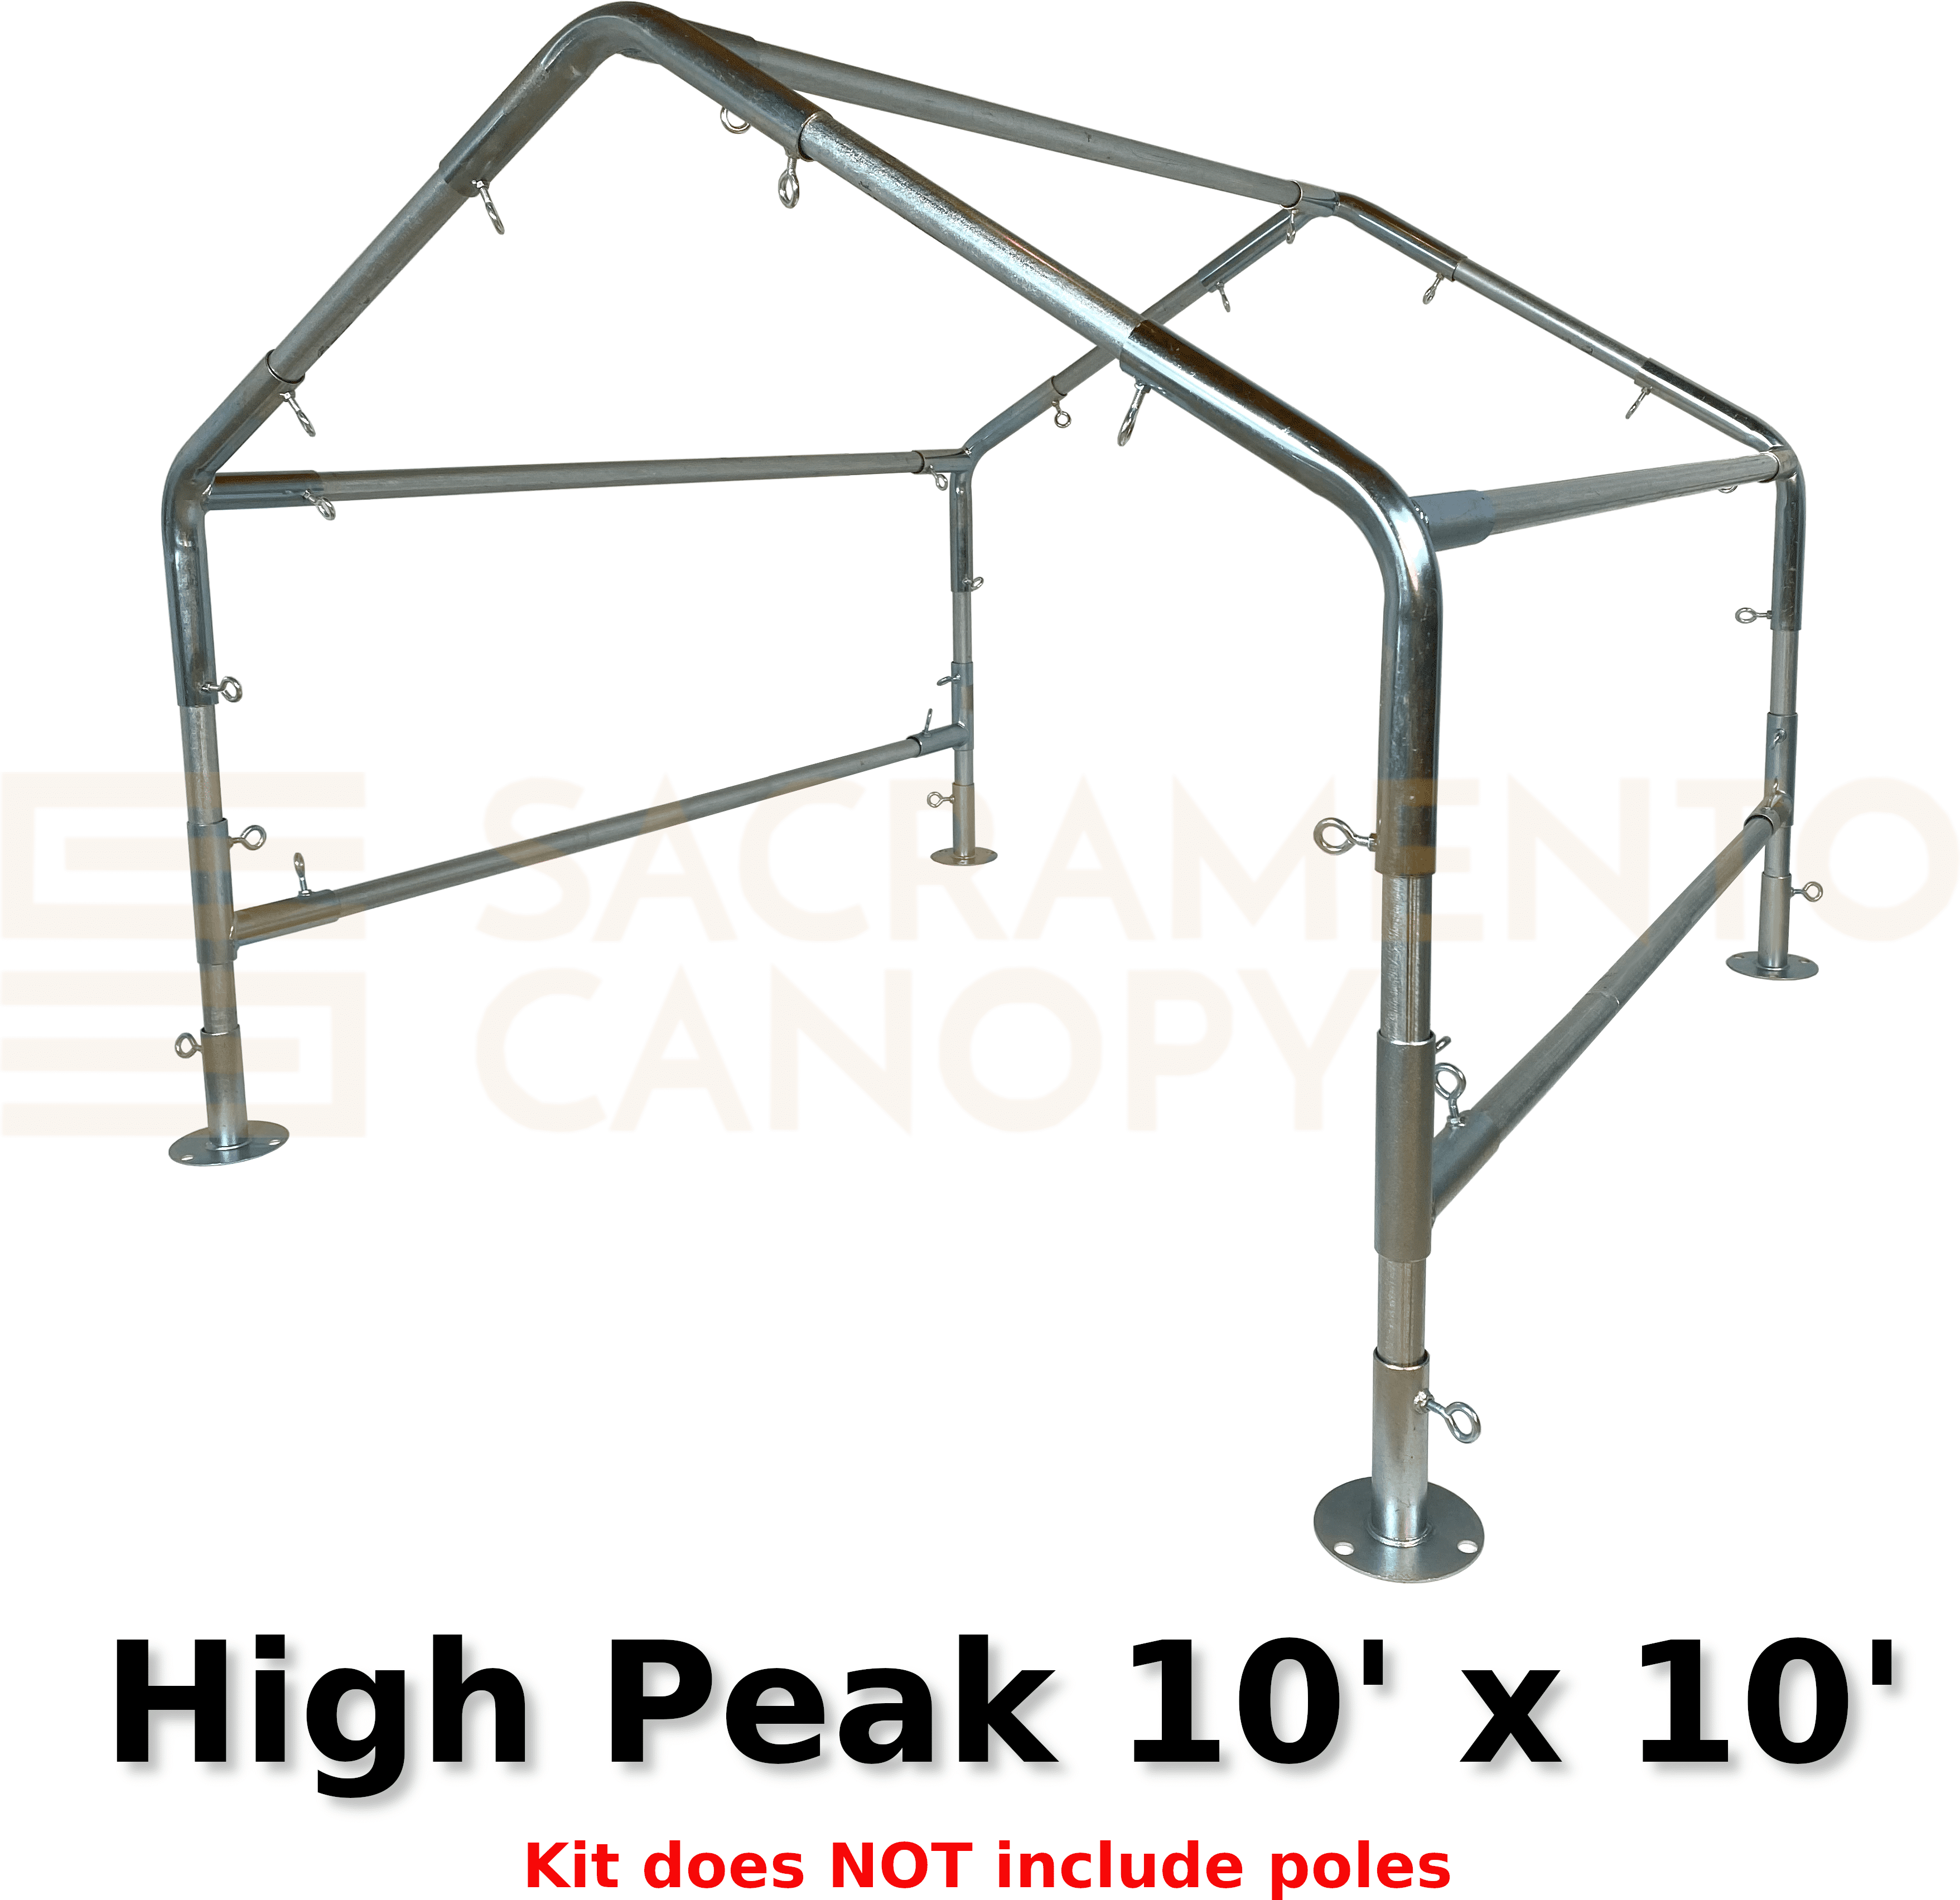 Barn Hay Chicken Coop Greenhouse Kit *FITTINGS ONLY* 1-1/2" HIGH PEAK Canopy 